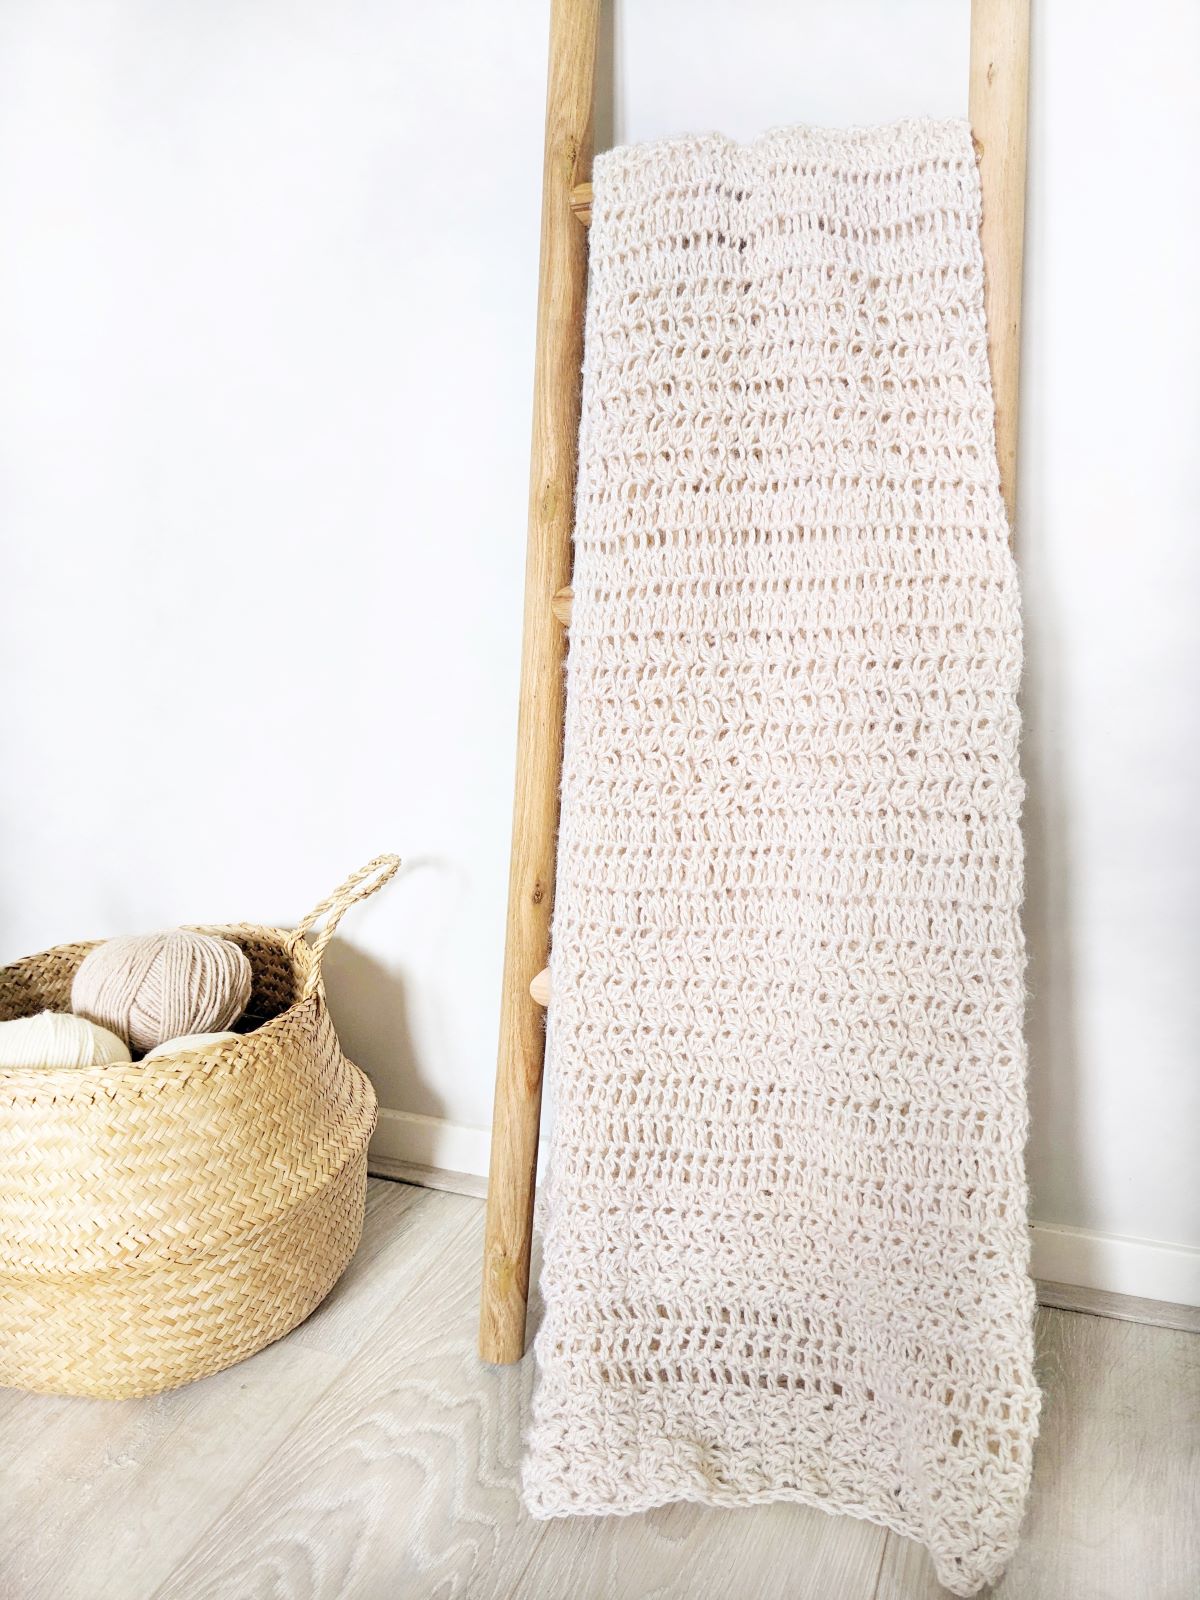 A large textured crochet blanket on a decorative ladder.